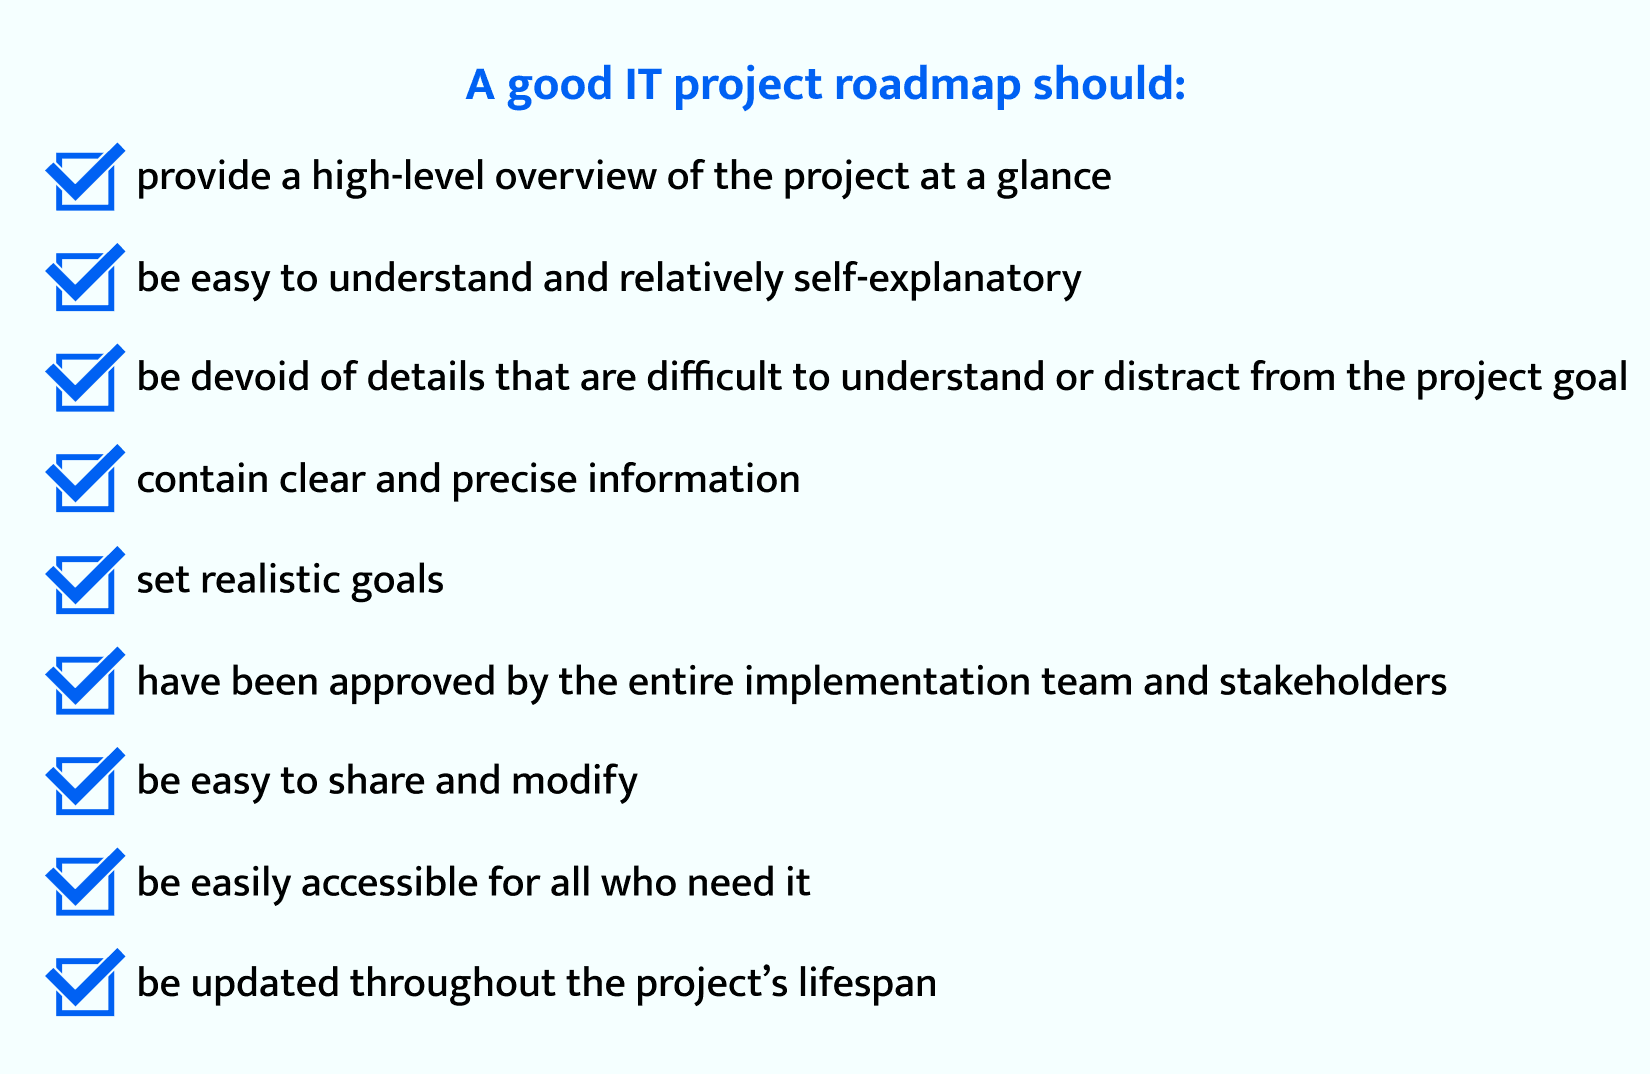 attributes of a good IT project roadmap 